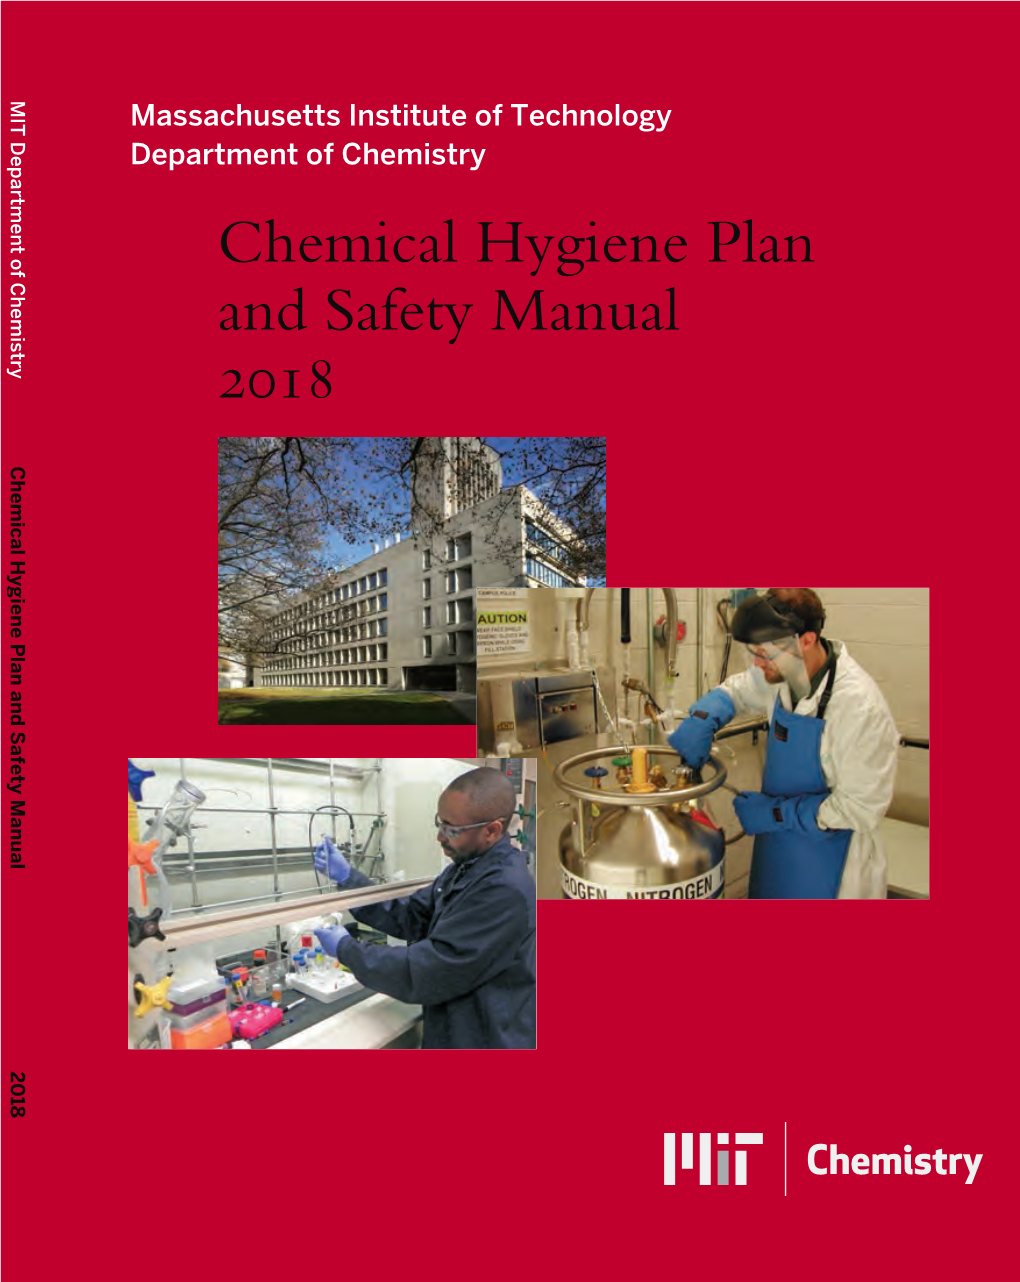 Chemical Hygiene Plan and Safety Manual 2018 Chemical Hygiene Plan and Safety Manual 2018 Massachusetts Institute of Technology Department of Chemistry